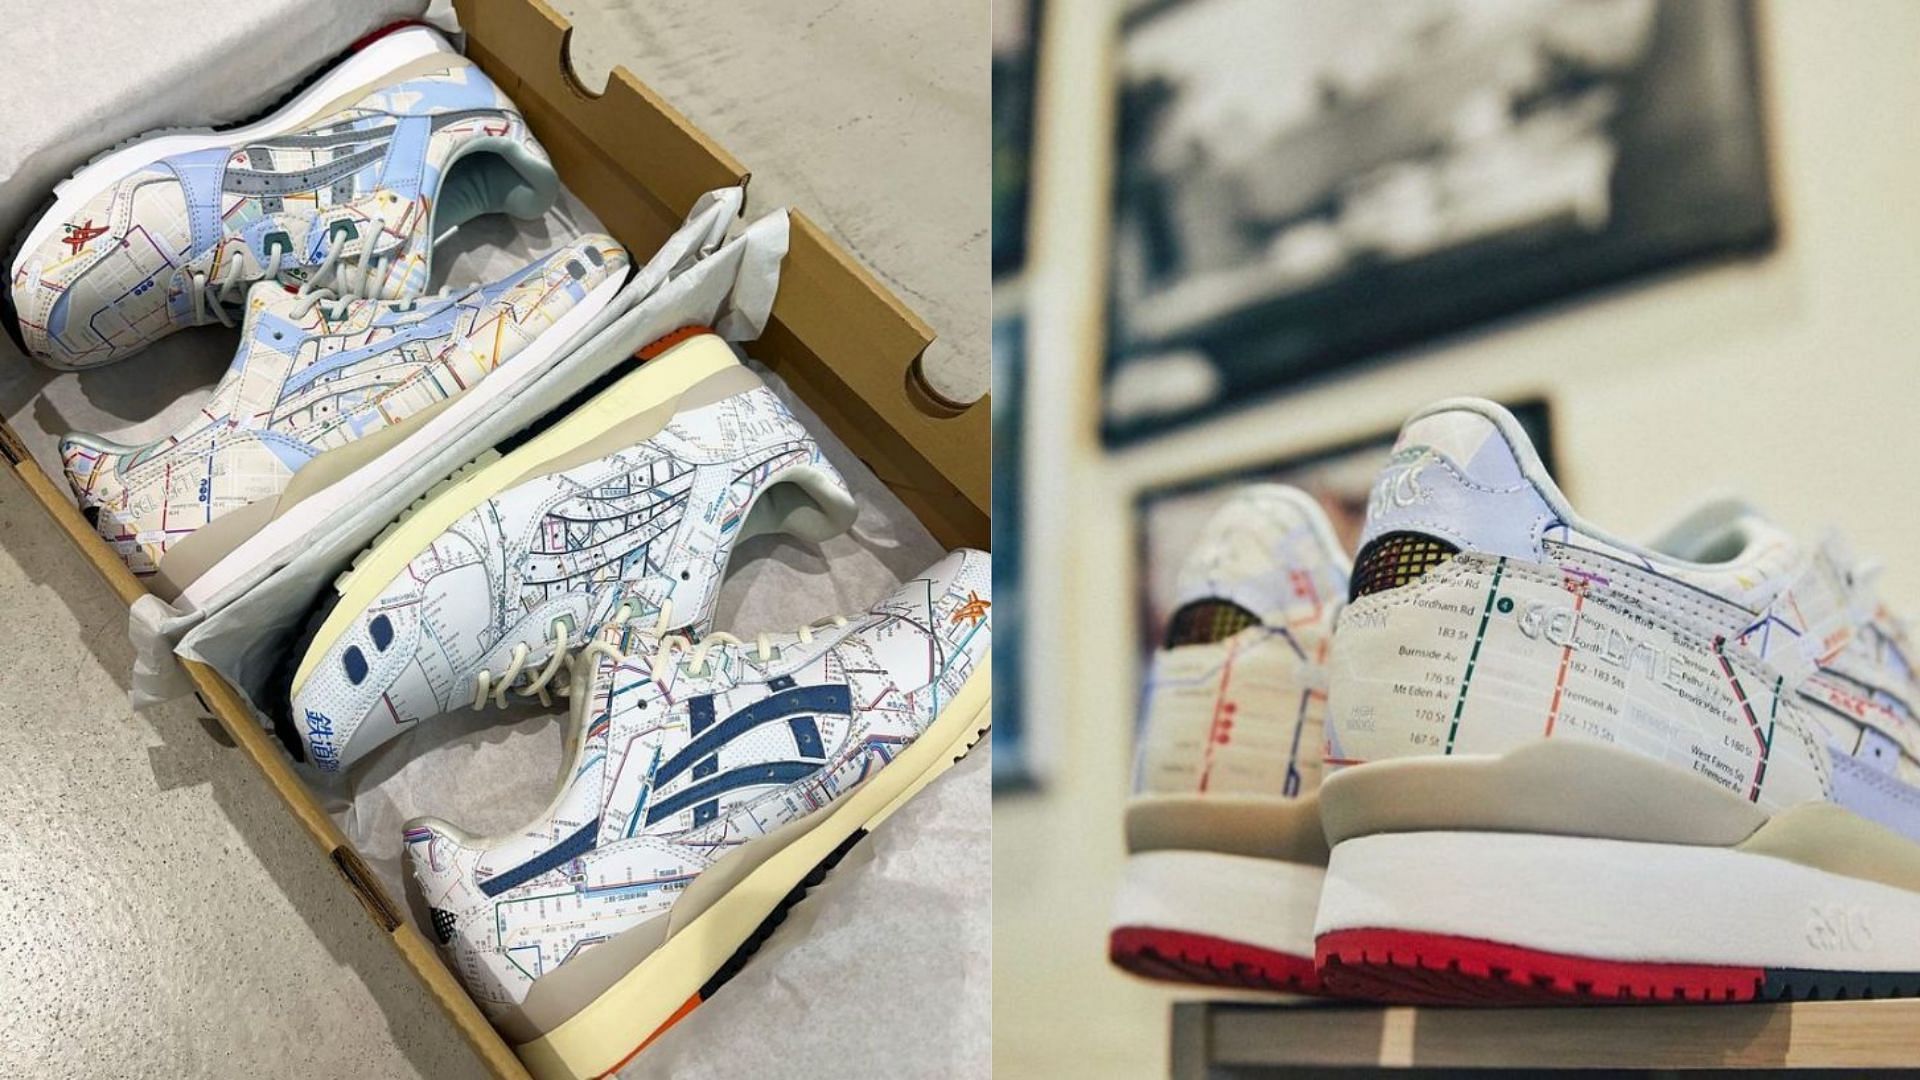 ASICS x Atmos came together for recreating signature Gel Lyte III sneakers (Image via Instagram/@atmosusa)